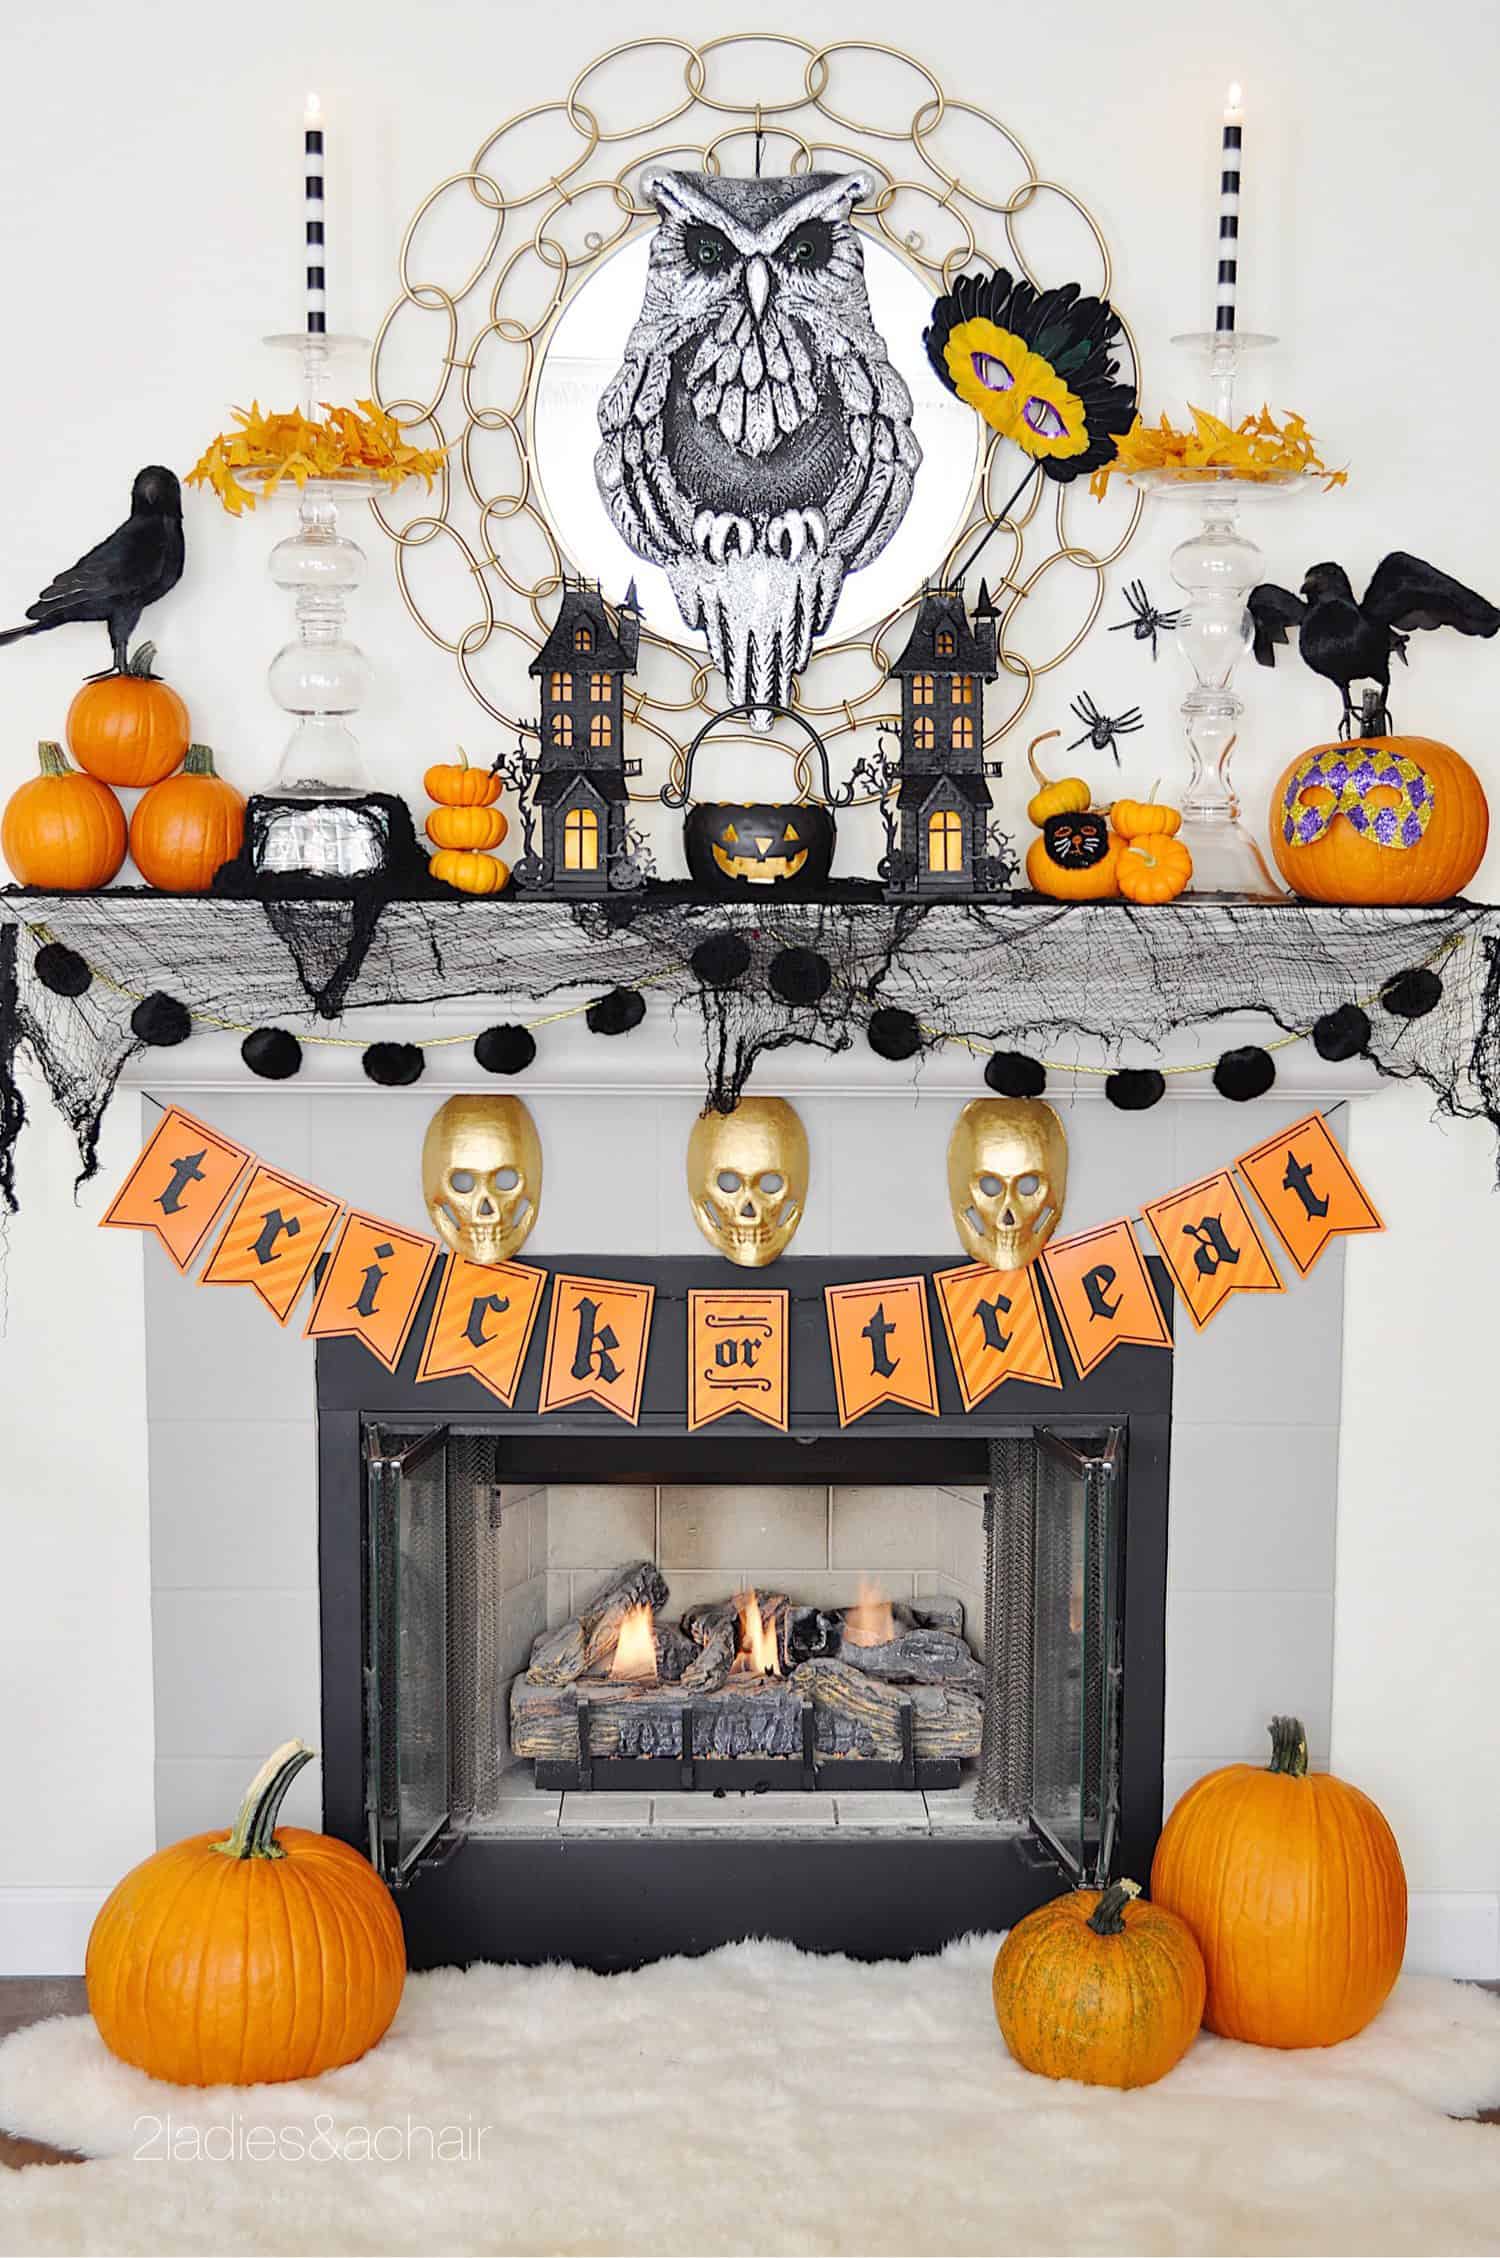 Spooky mantle with bats, birds, and pumpkins.